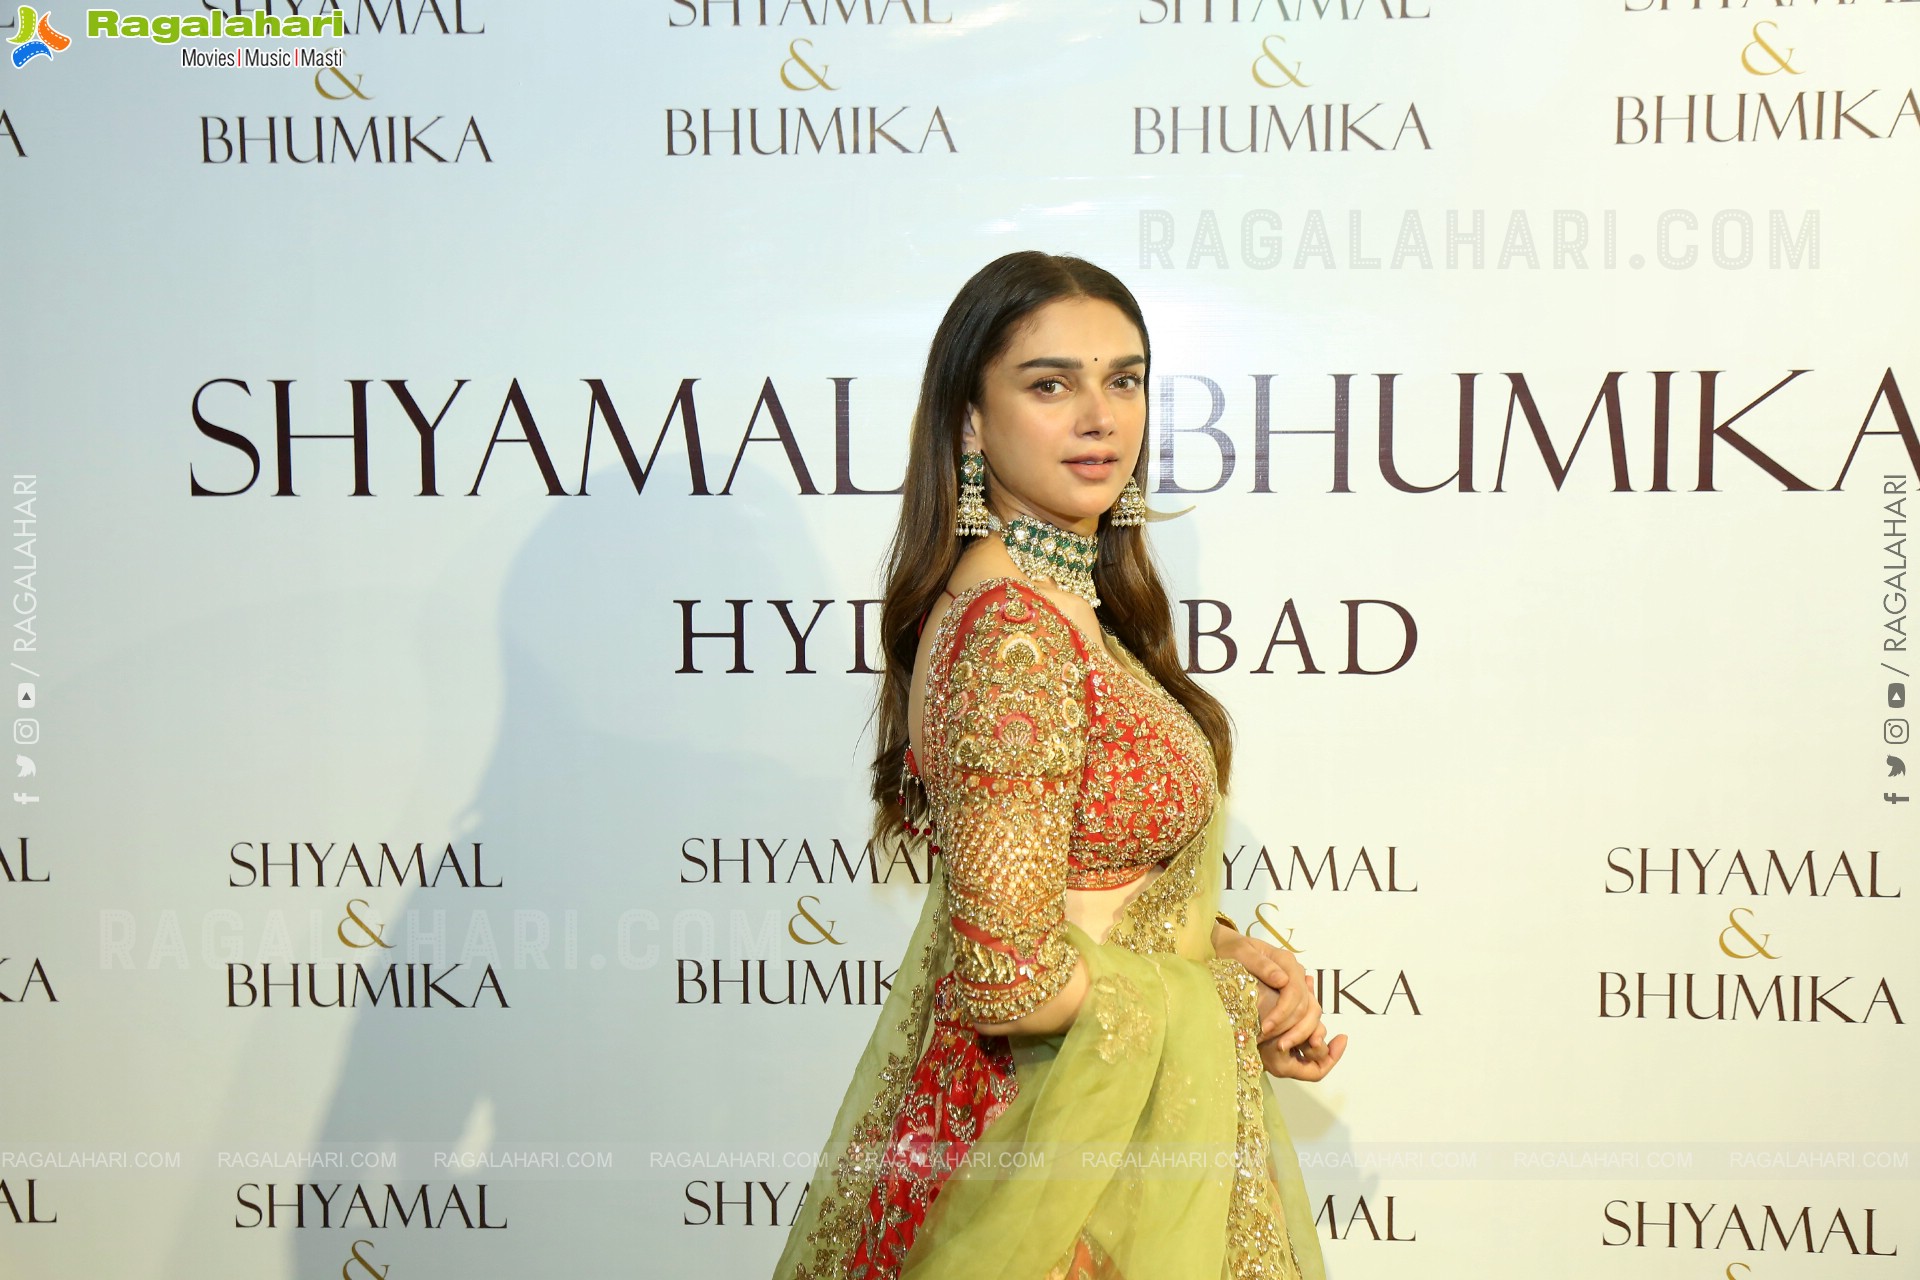 Shyamal Bhumika’s Wedding Couture Collection 2022 Launch in Hyderabad